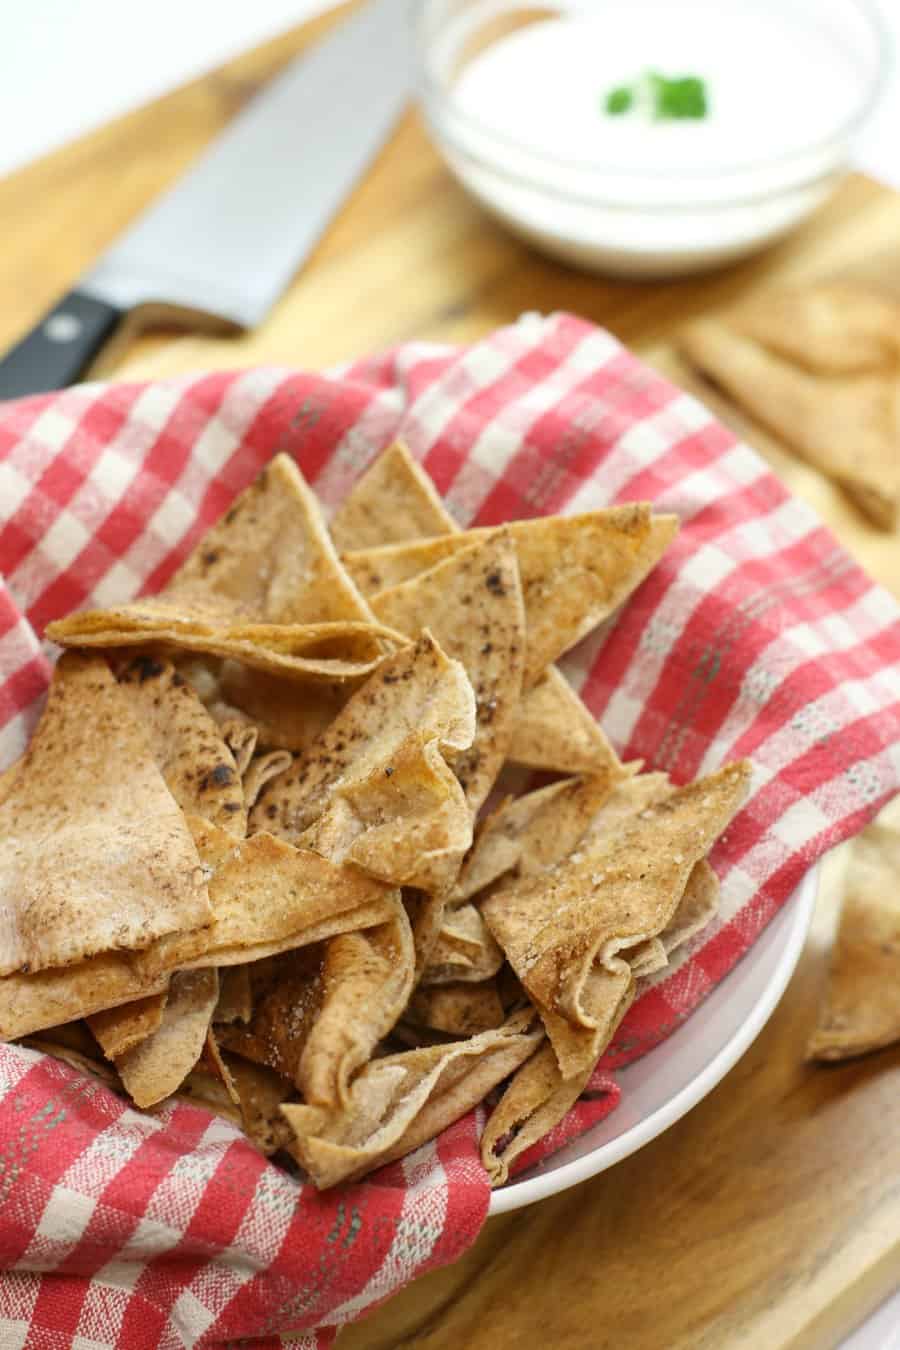 The perfect after school snack, oven baked pita chips with hummus and veg!